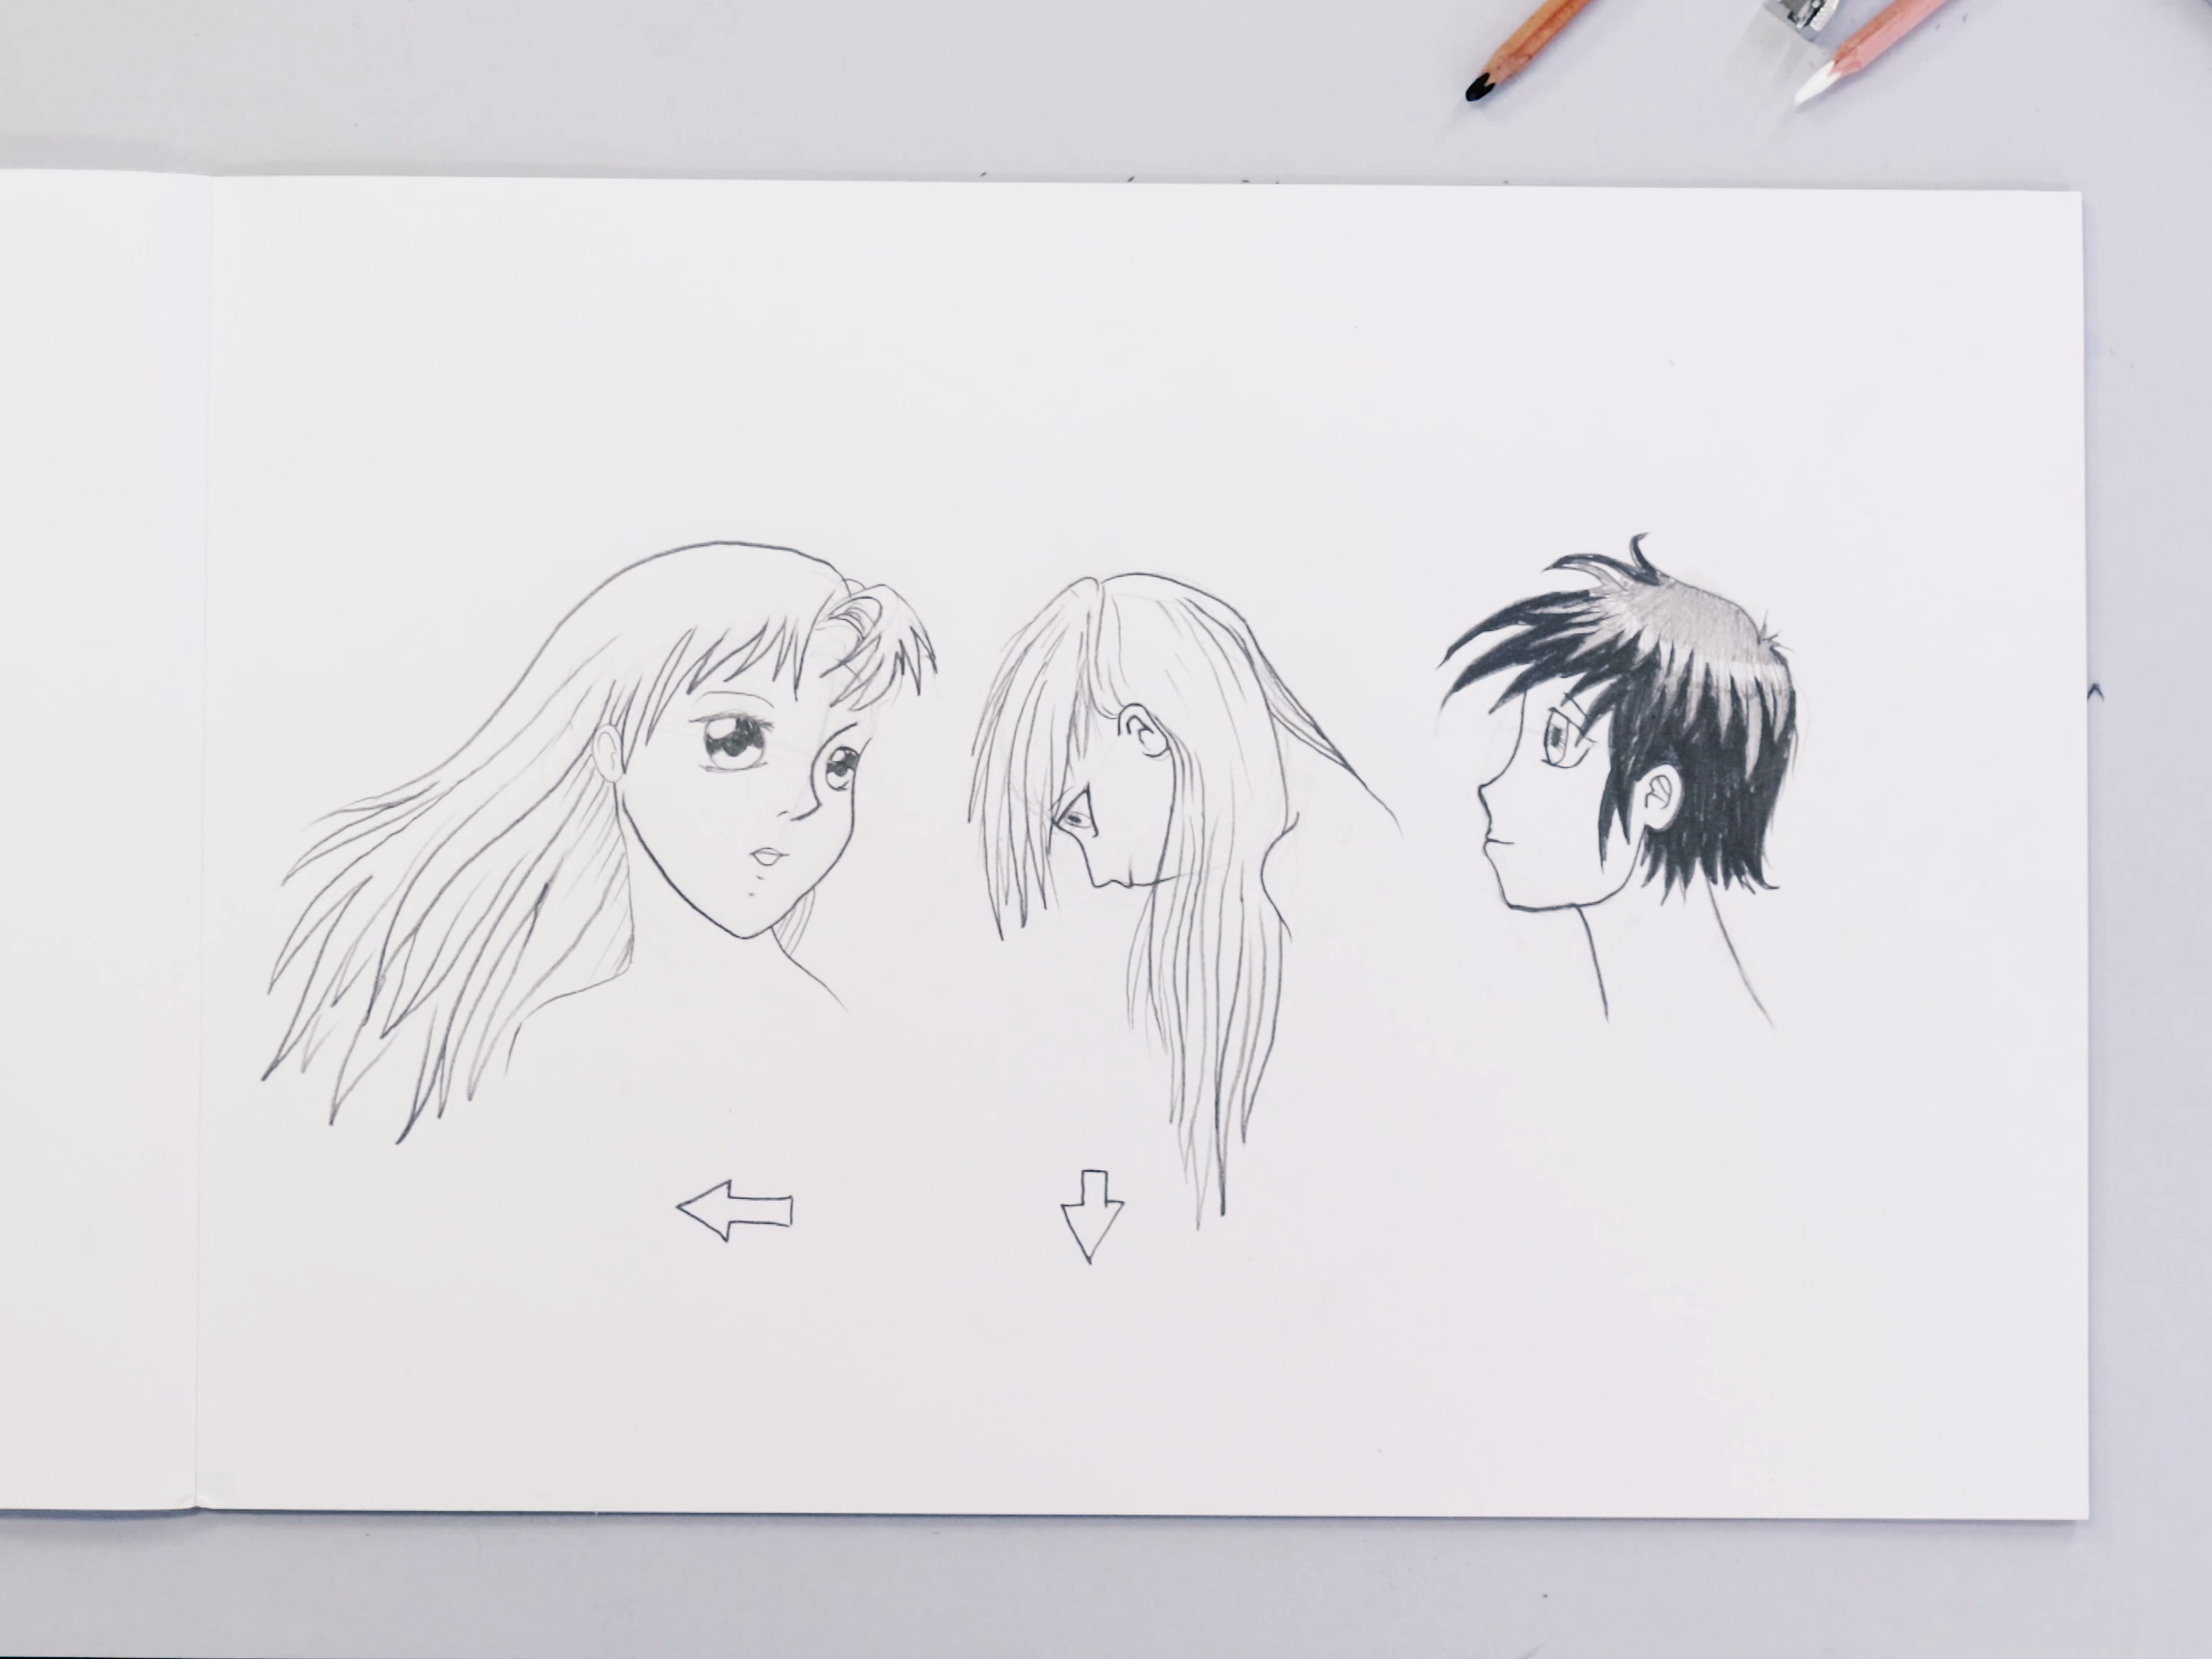 Pin by sam on Drawing  How to draw anime eyes, Closed eye drawing